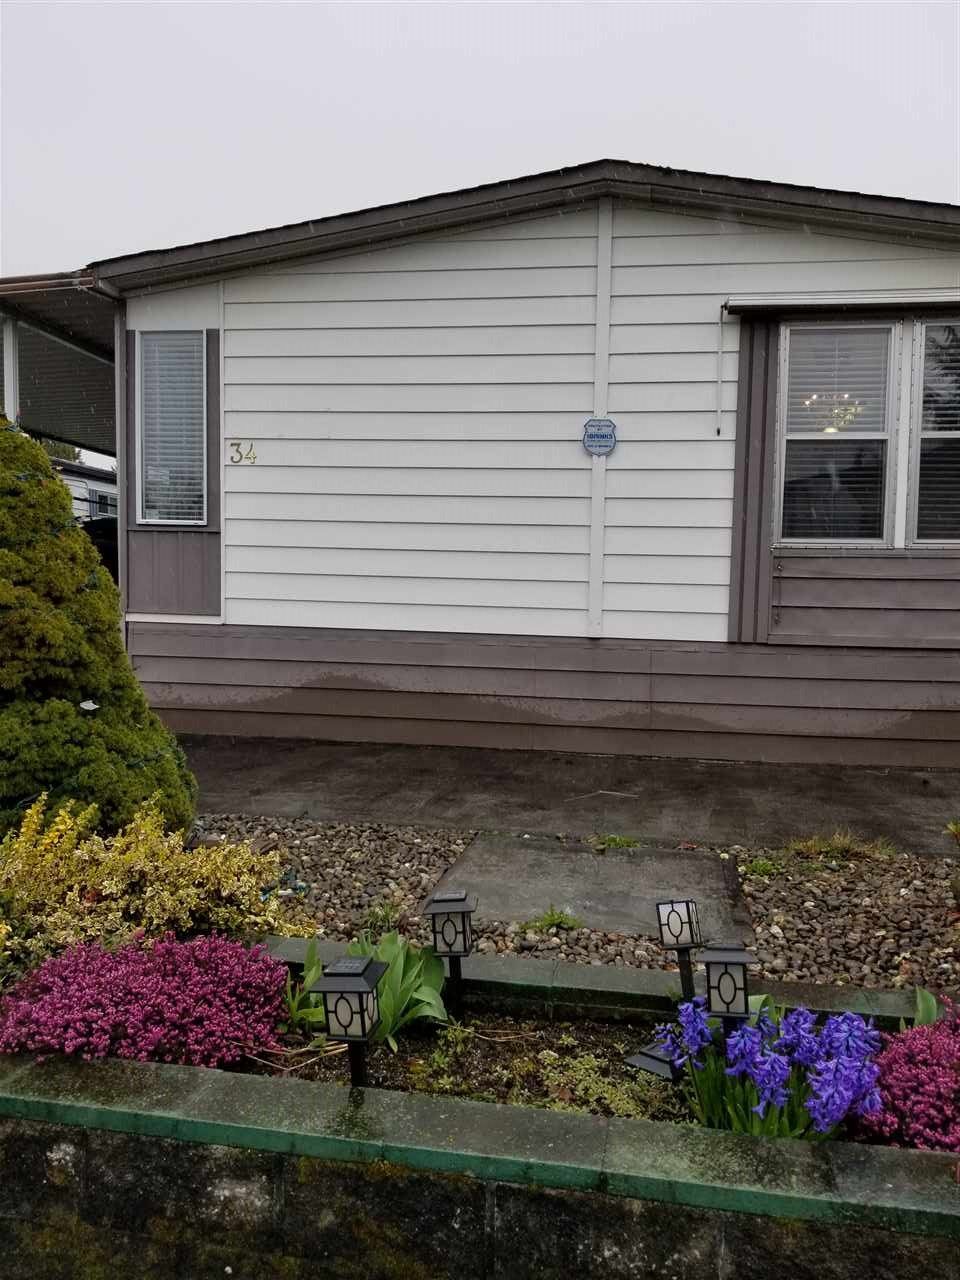 Main Photo: 34 8560 156 STREET in : Fleetwood Tynehead Manufactured Home for sale : MLS®# R2254097